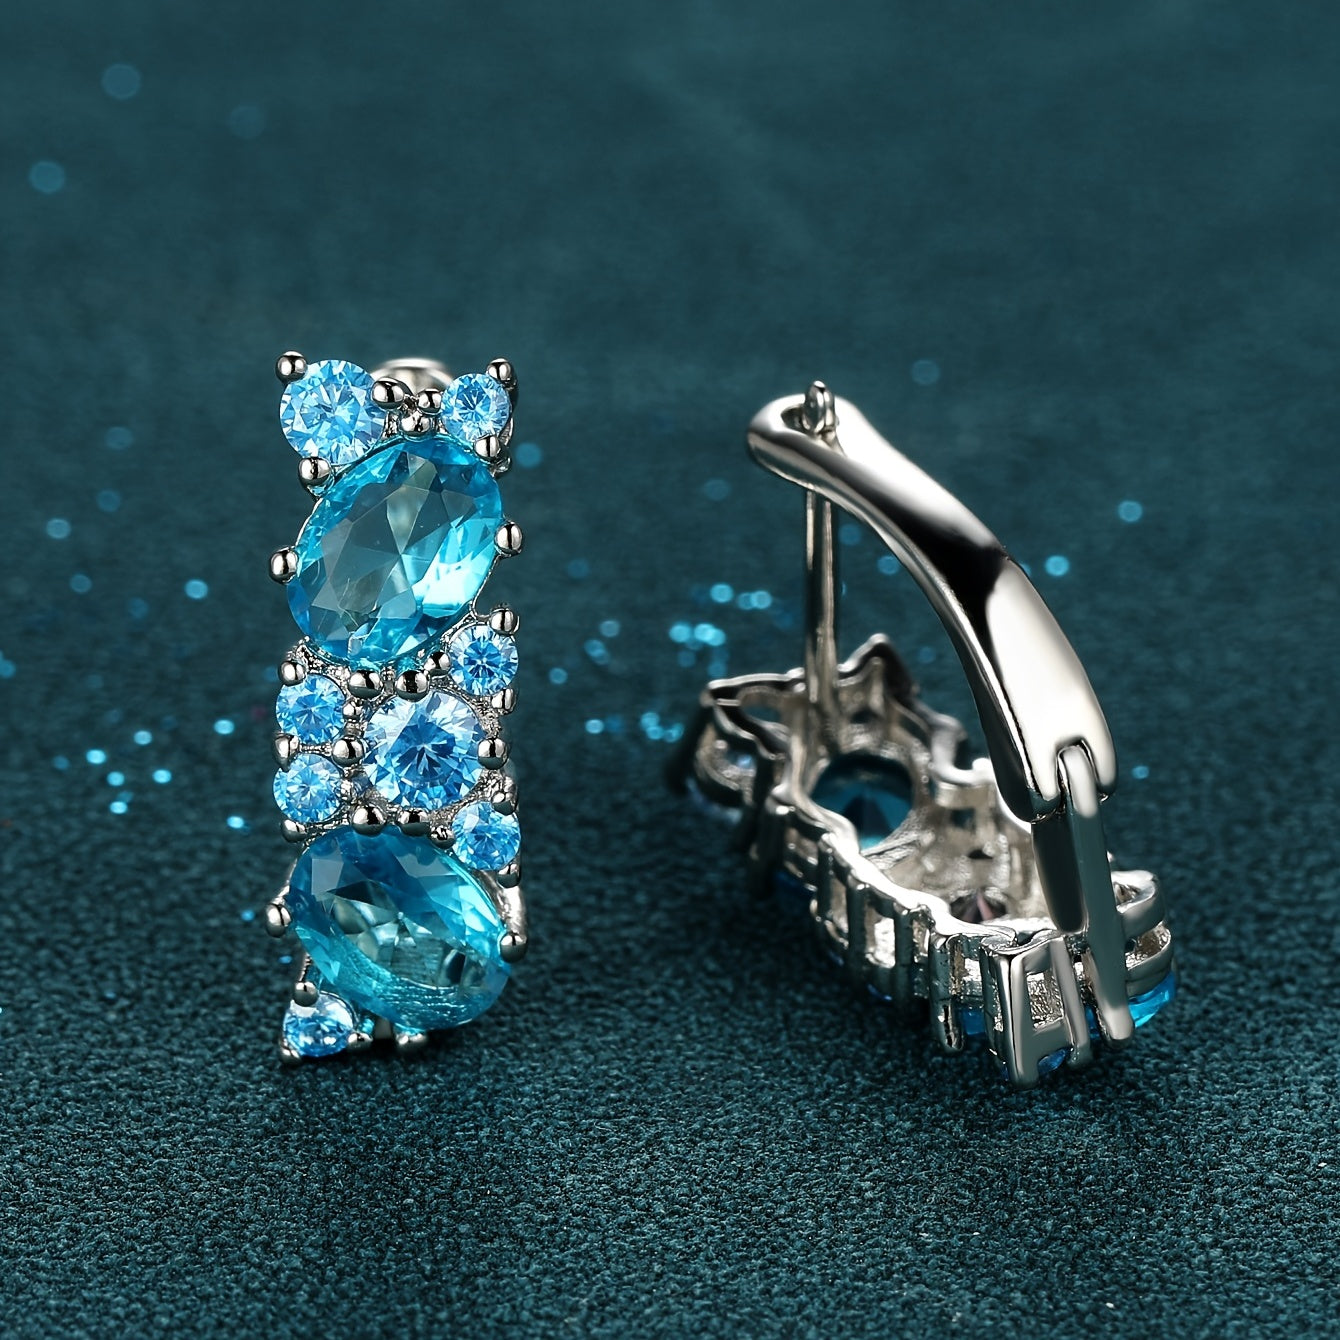 Gorgeous Silver Engagement Earrings with Luxurious Aqua Blue Zircon Stones - Perfect for Any Special Occasion!